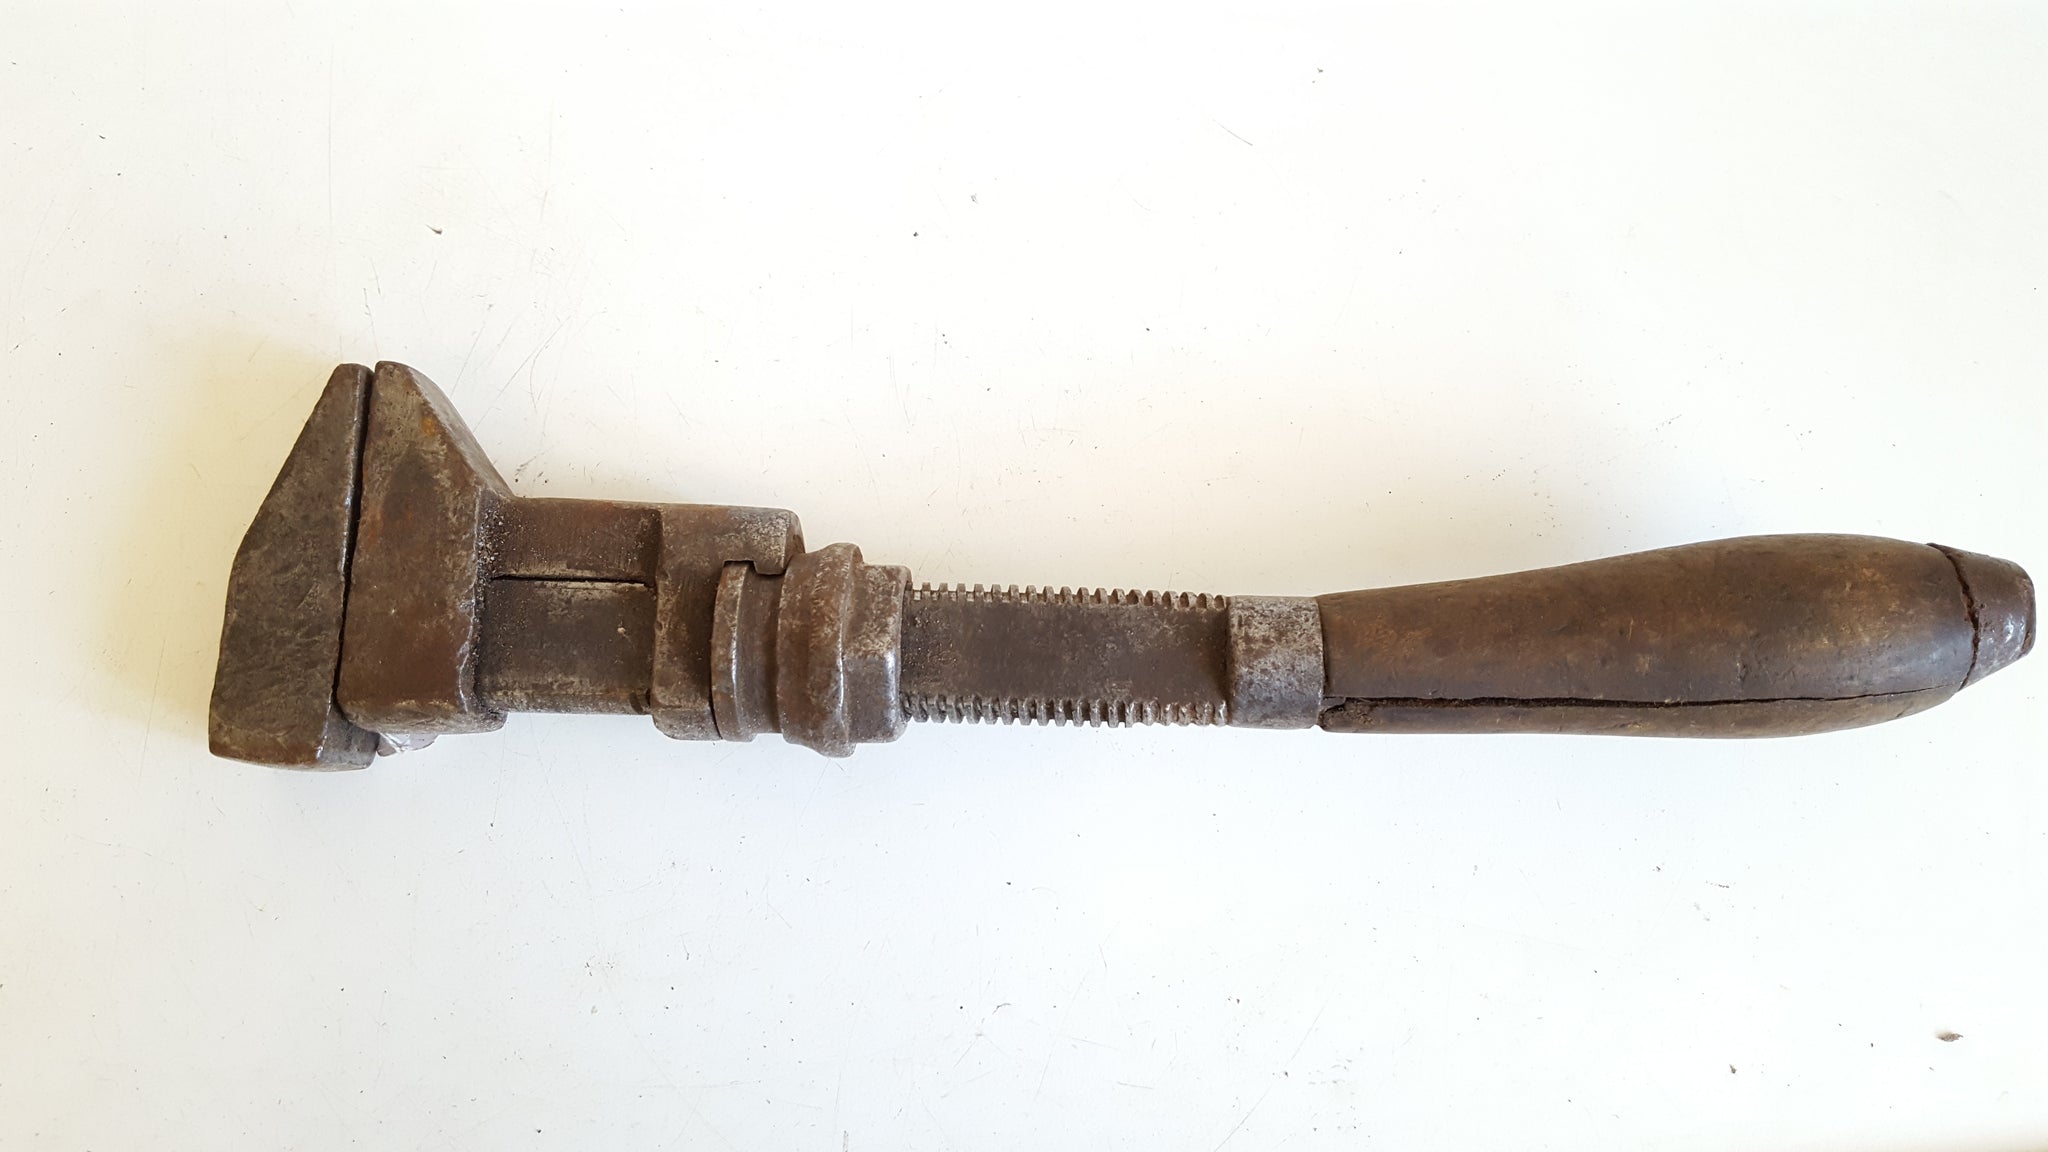 Very Nice 12" Vintage Adjustable Wrench 40366